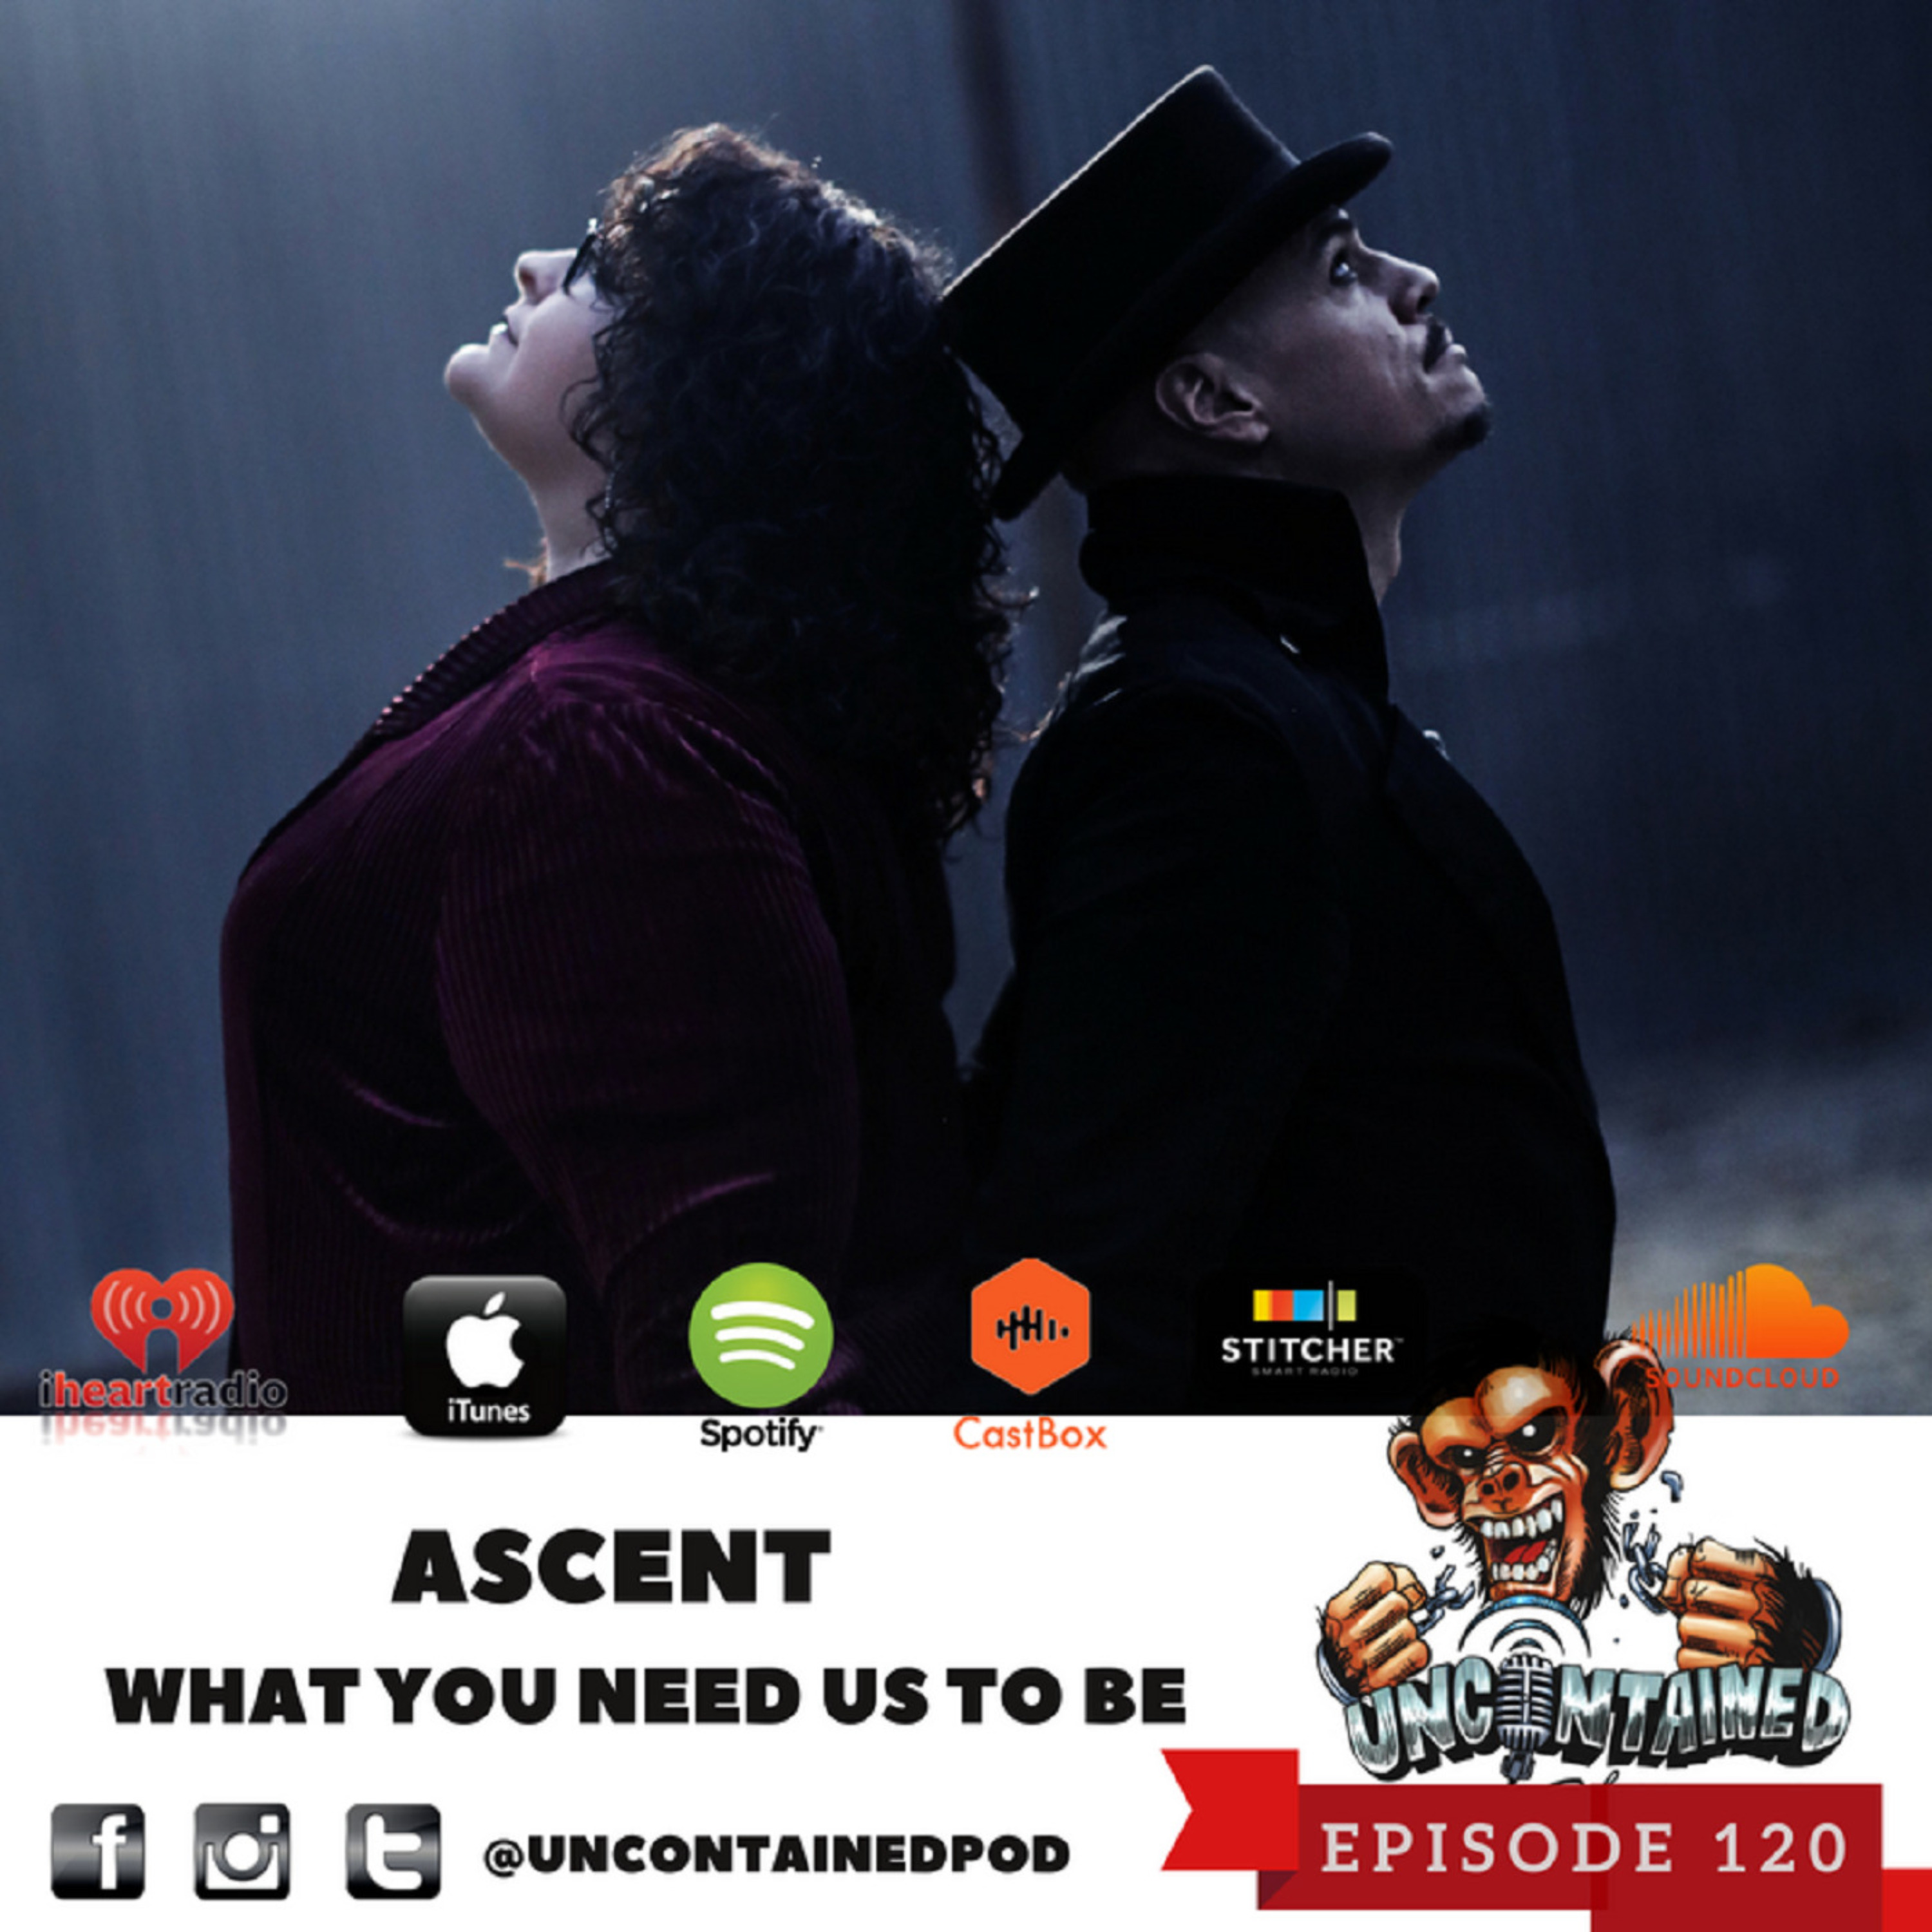 Episode 120: Ascent - What You Need Us To Be